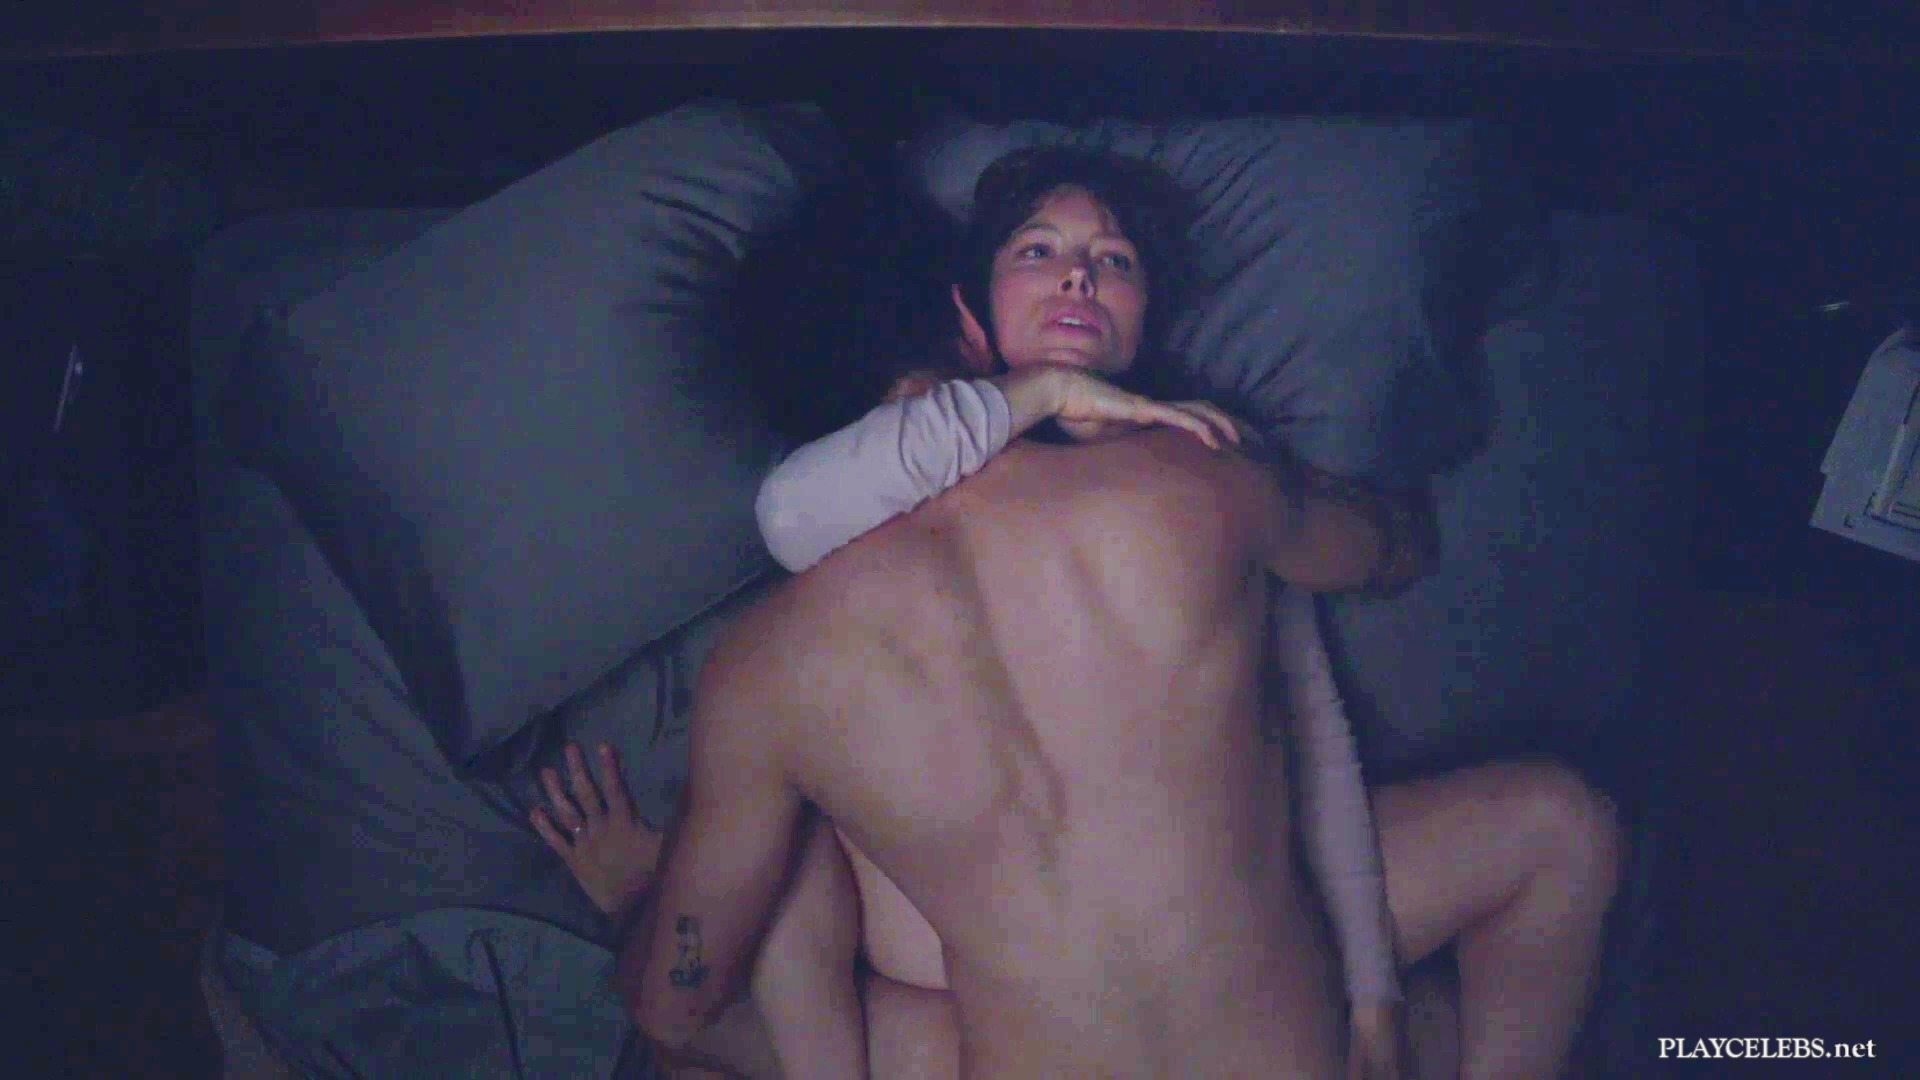 Jessica Biel Naked And Sex Scenes In The Sinner - PlayCelebs.net